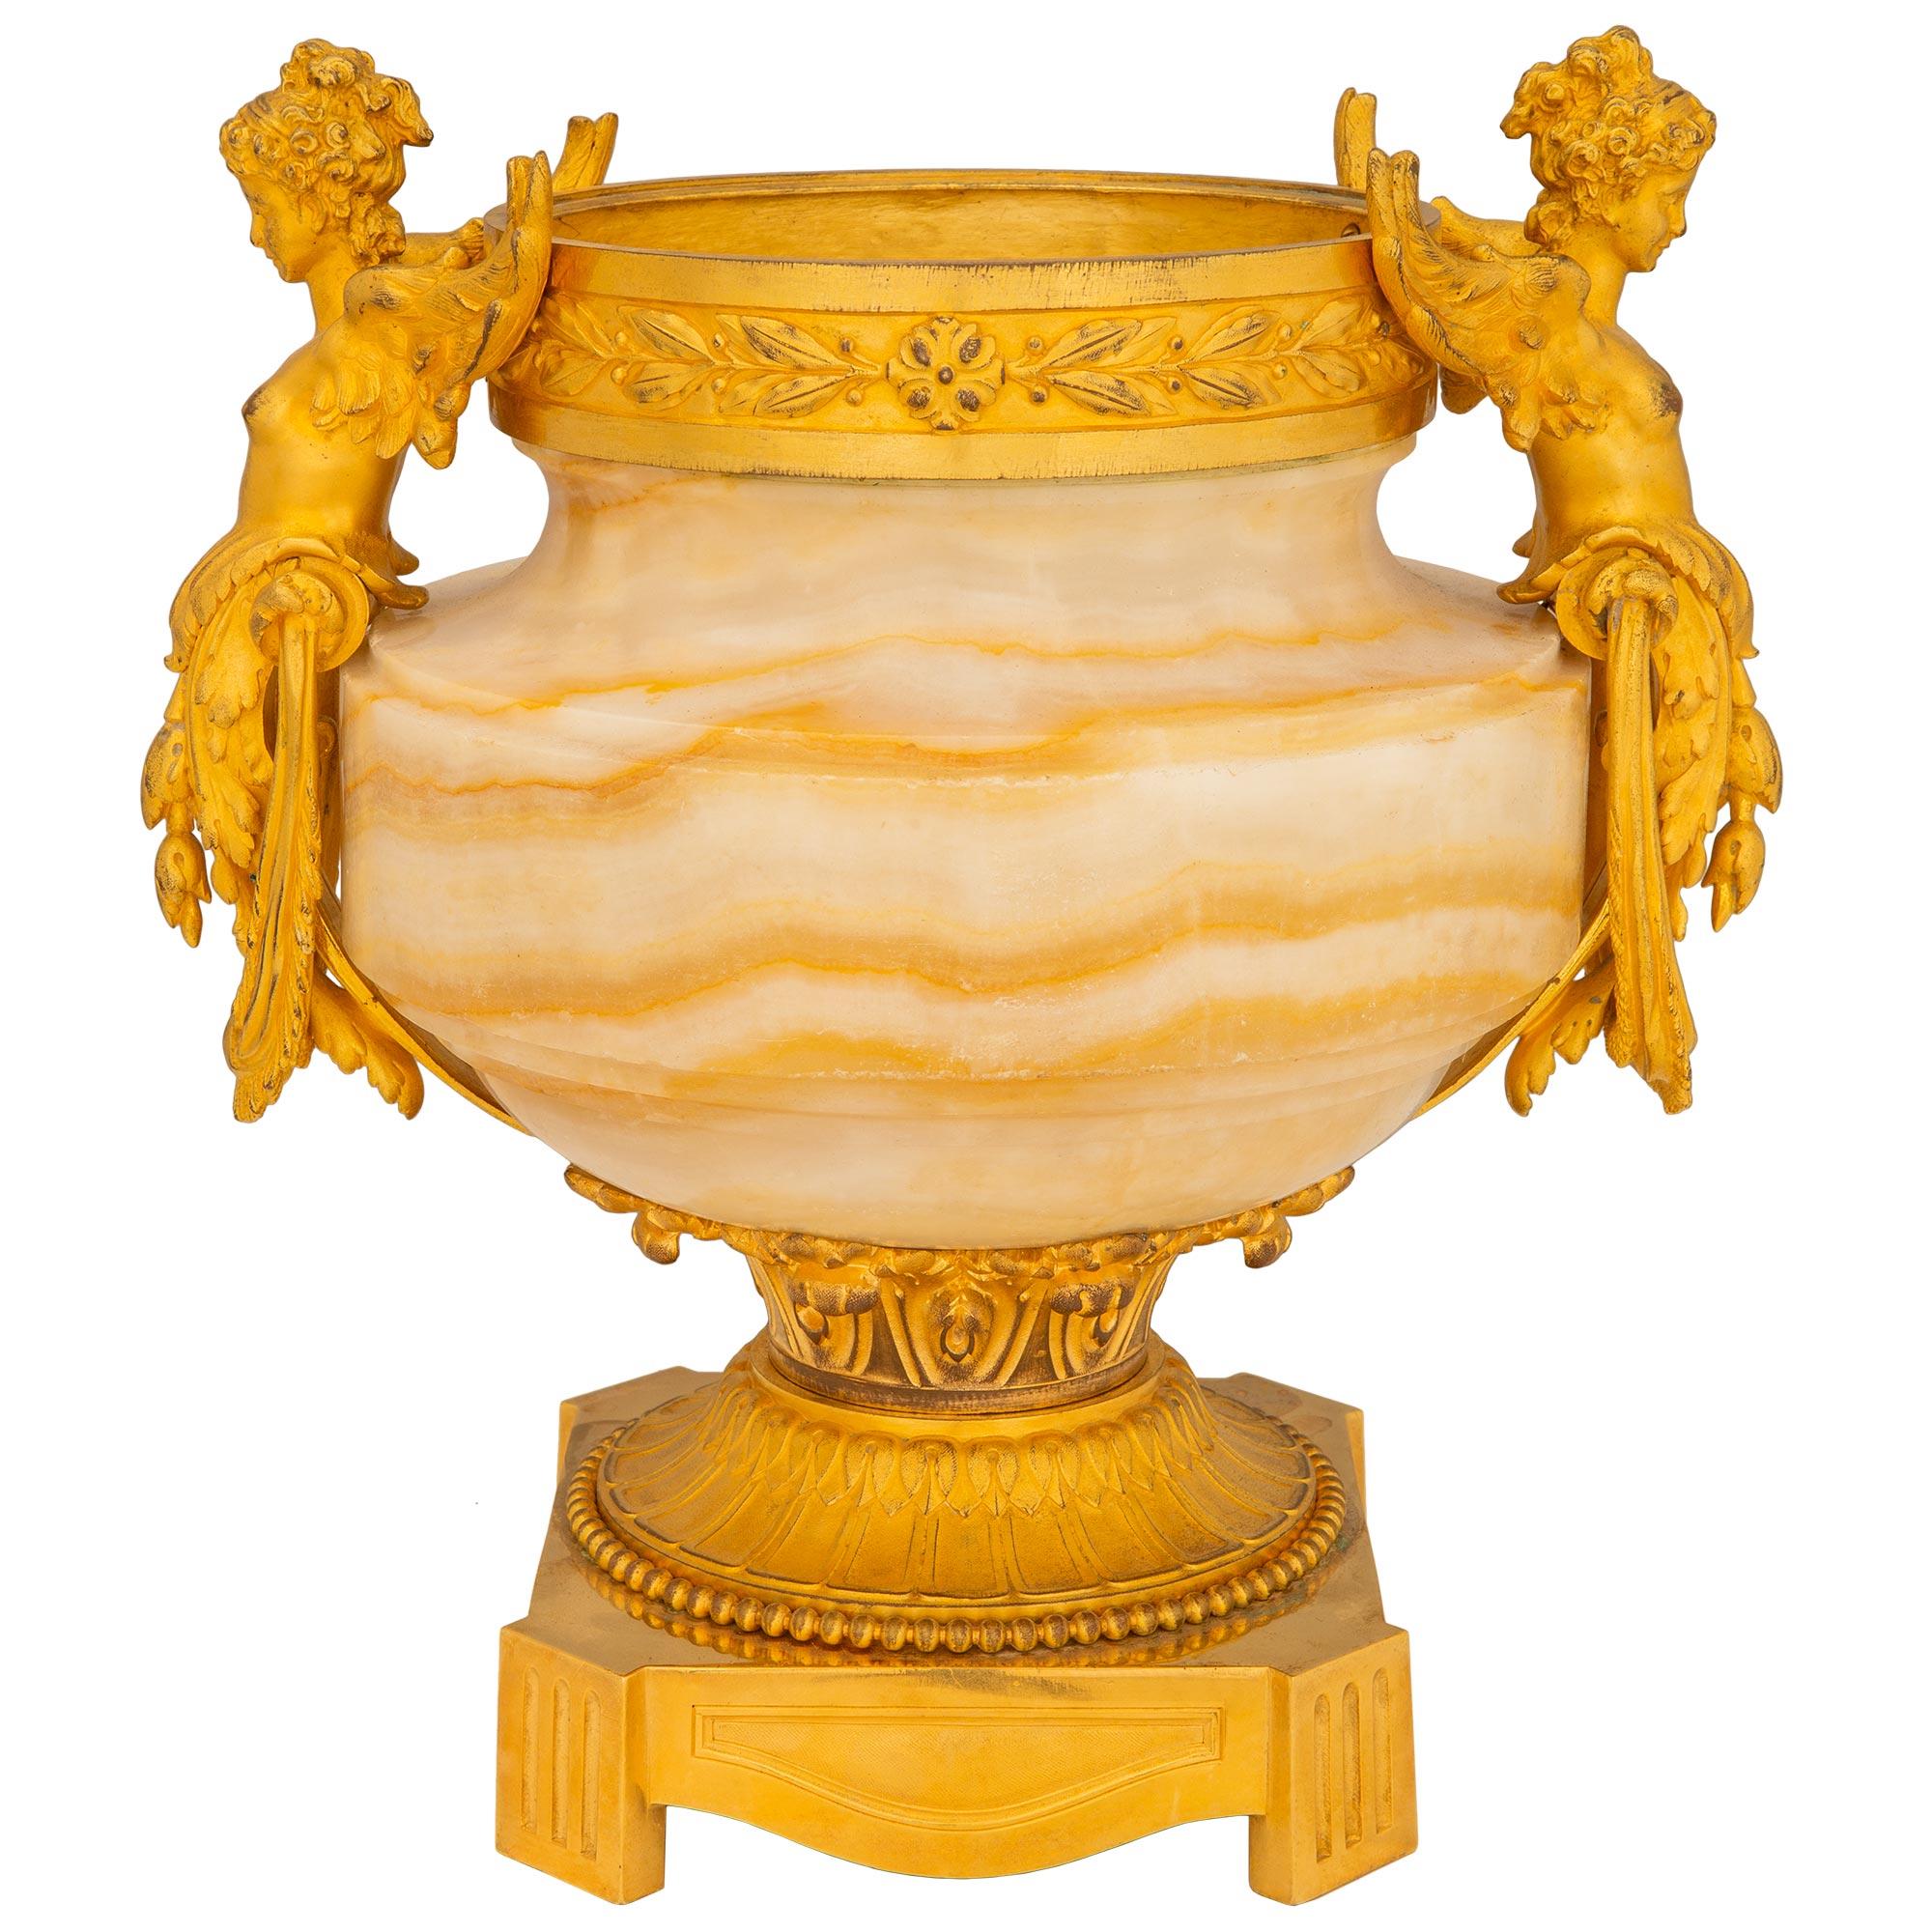 French 19th Century Louis XVI St. Belle Époque Period Onyx and Ormolu Urn In Good Condition For Sale In West Palm Beach, FL